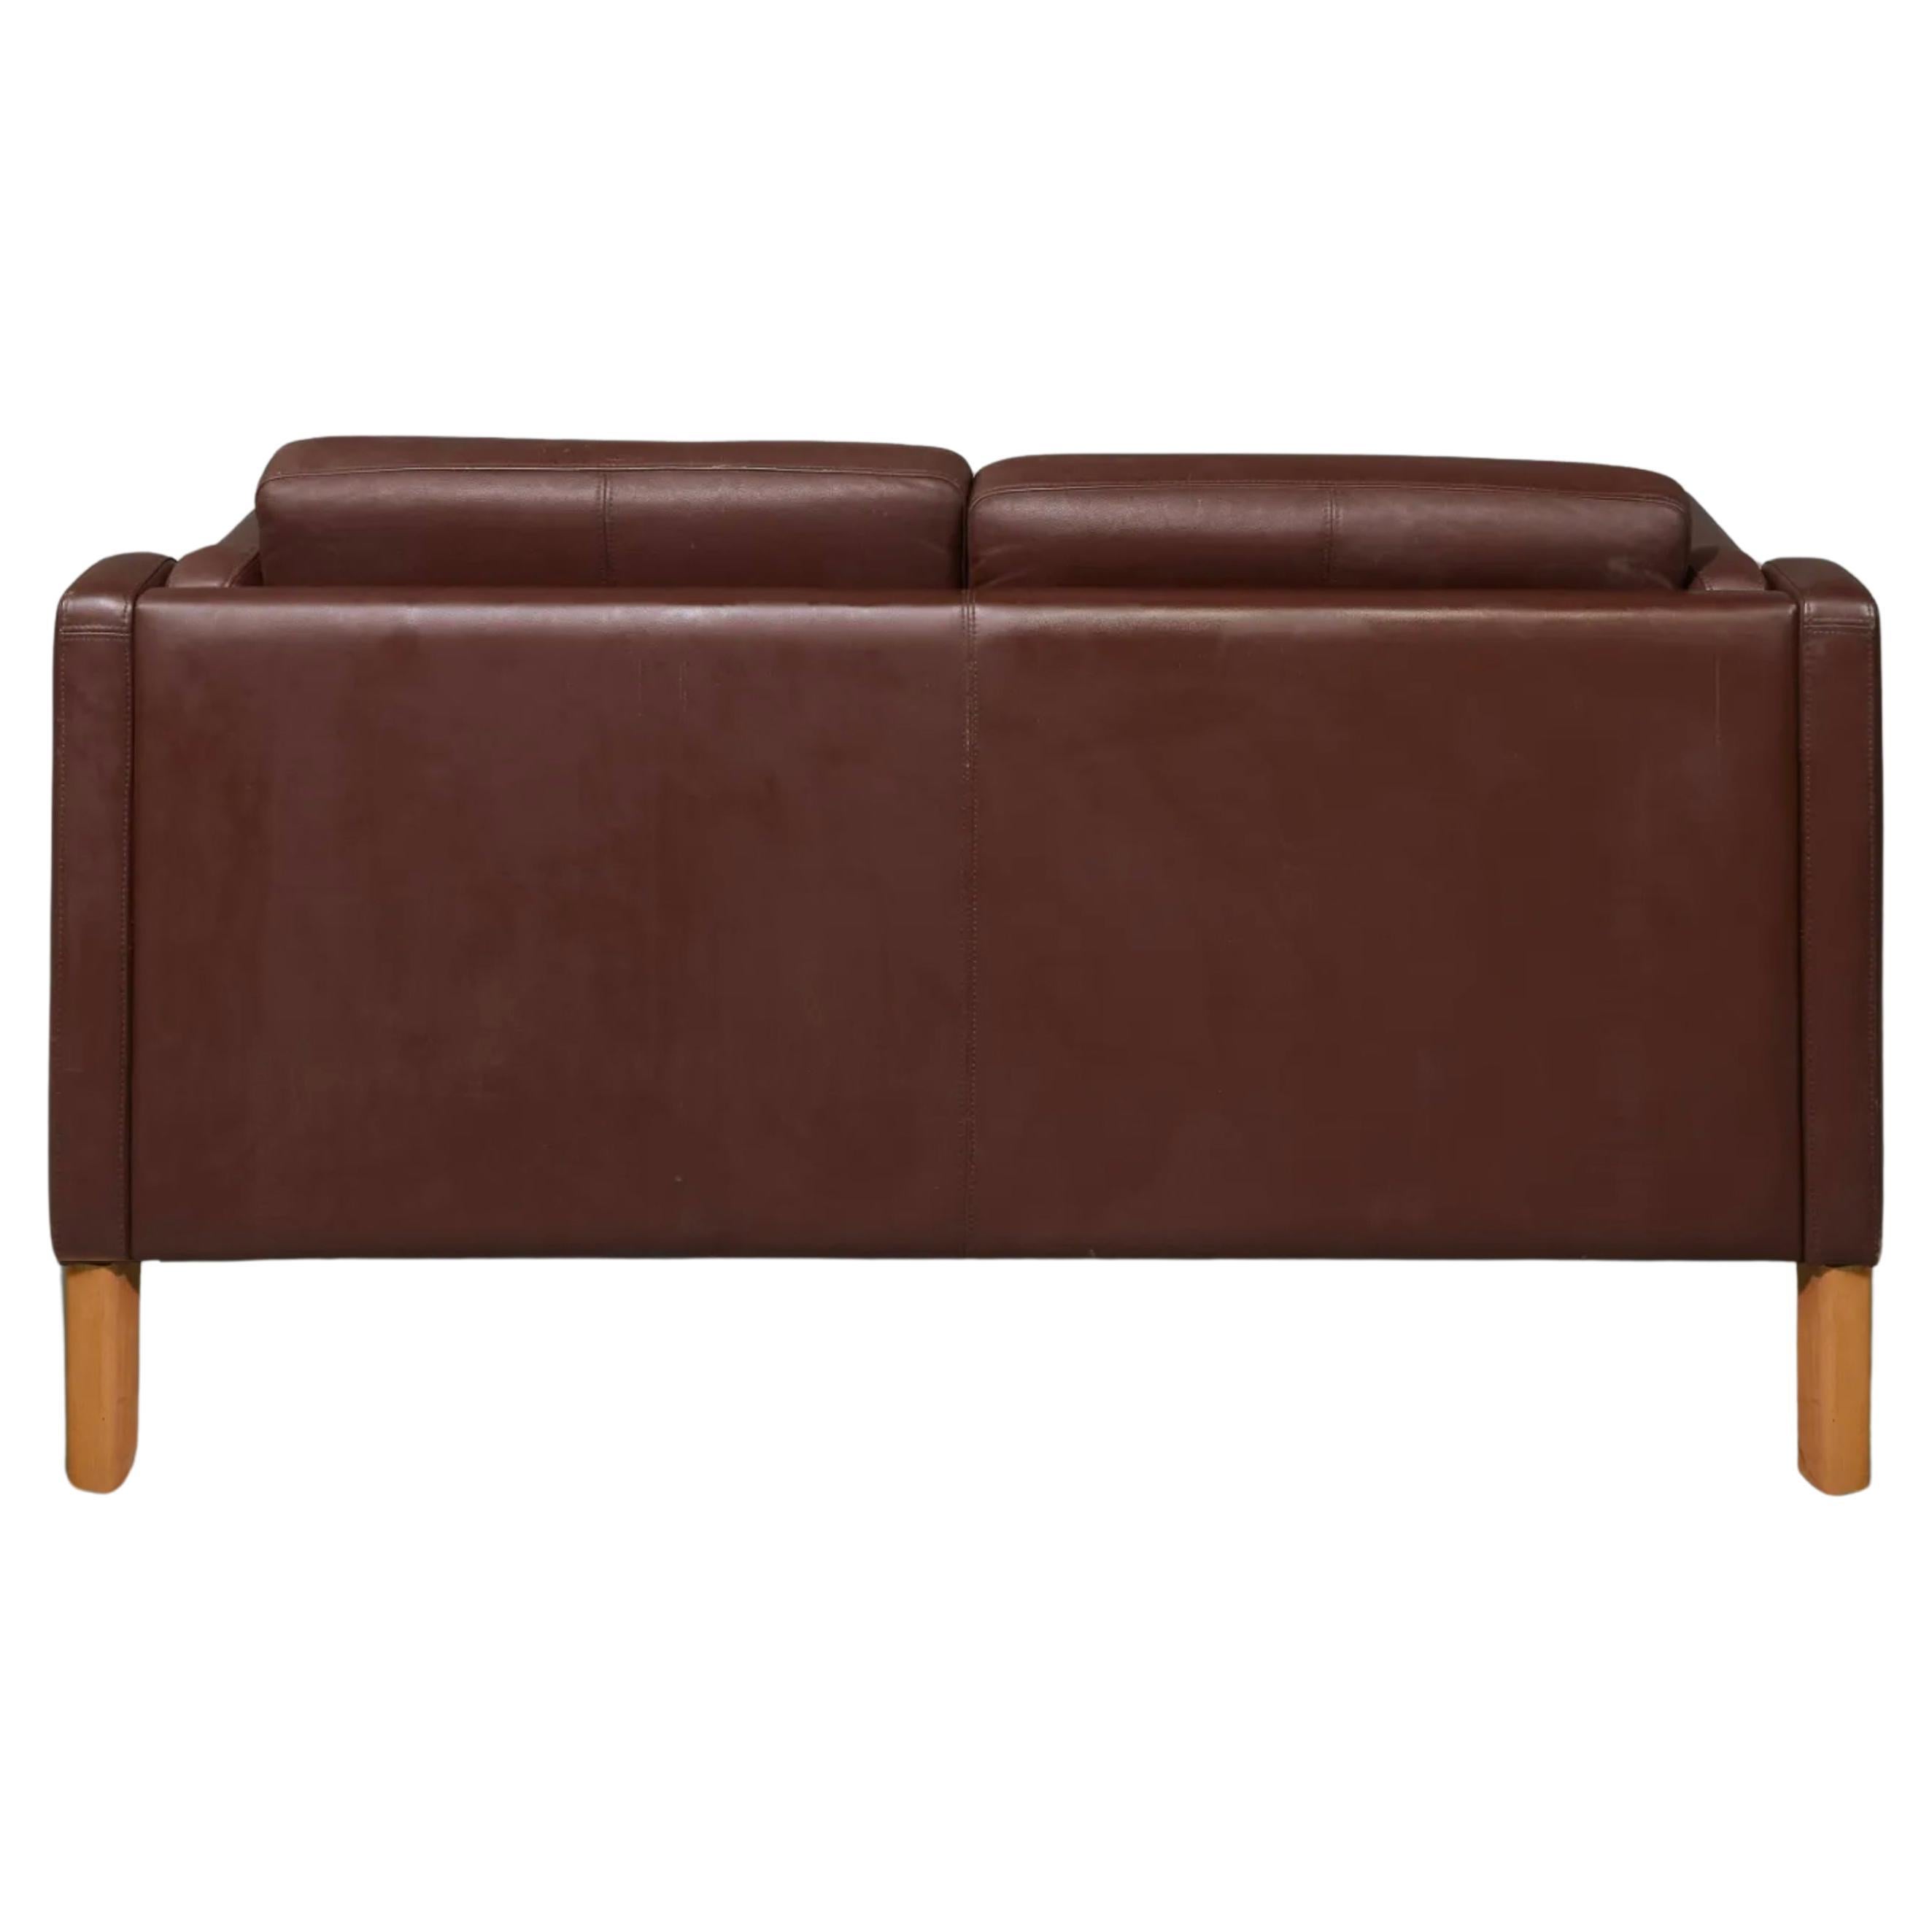 Woodwork Danish modern brown leather 2 seat sofa with birch legs style of Børge Mogensen For Sale